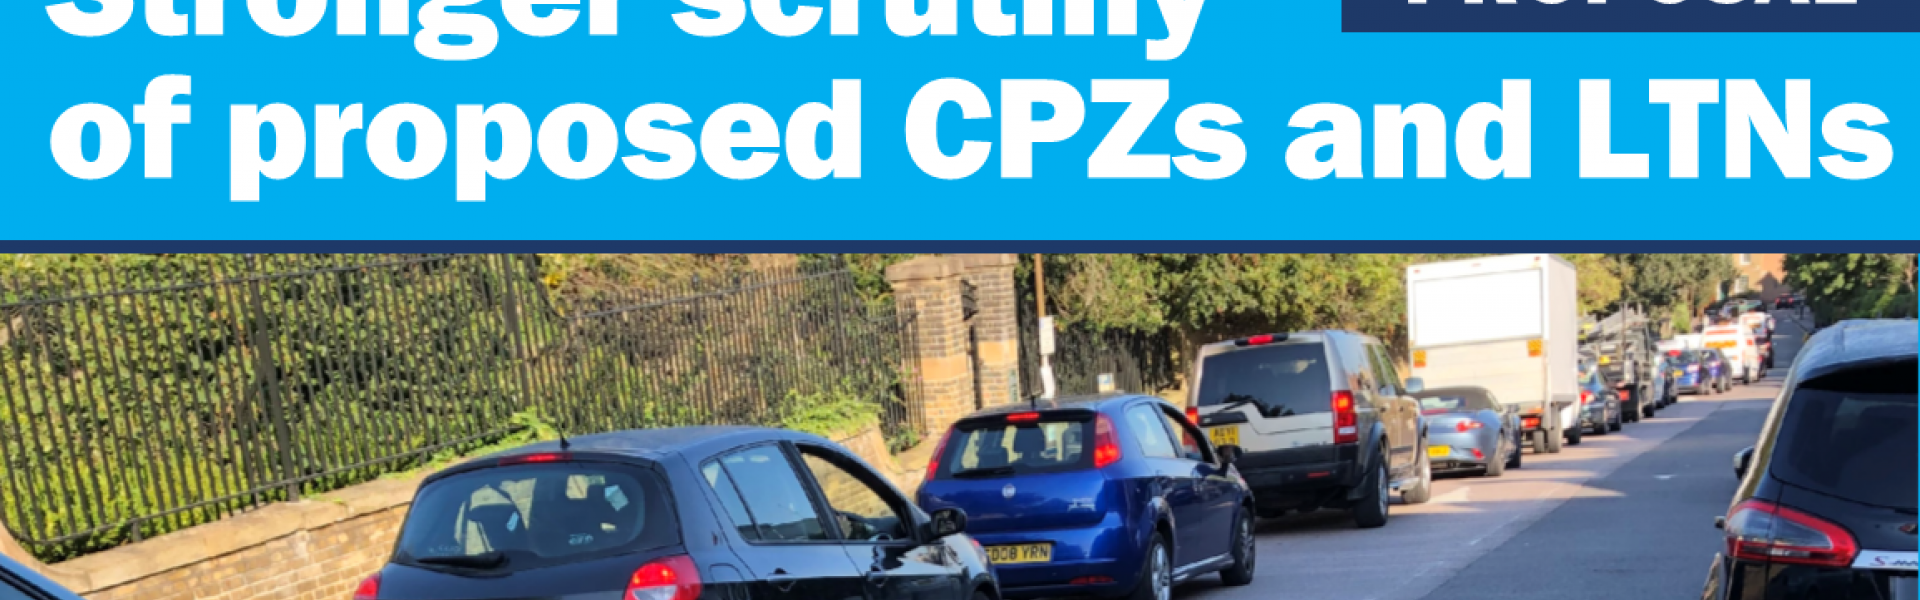 Proposal for stronger scrutiny of CPZs and LTNs